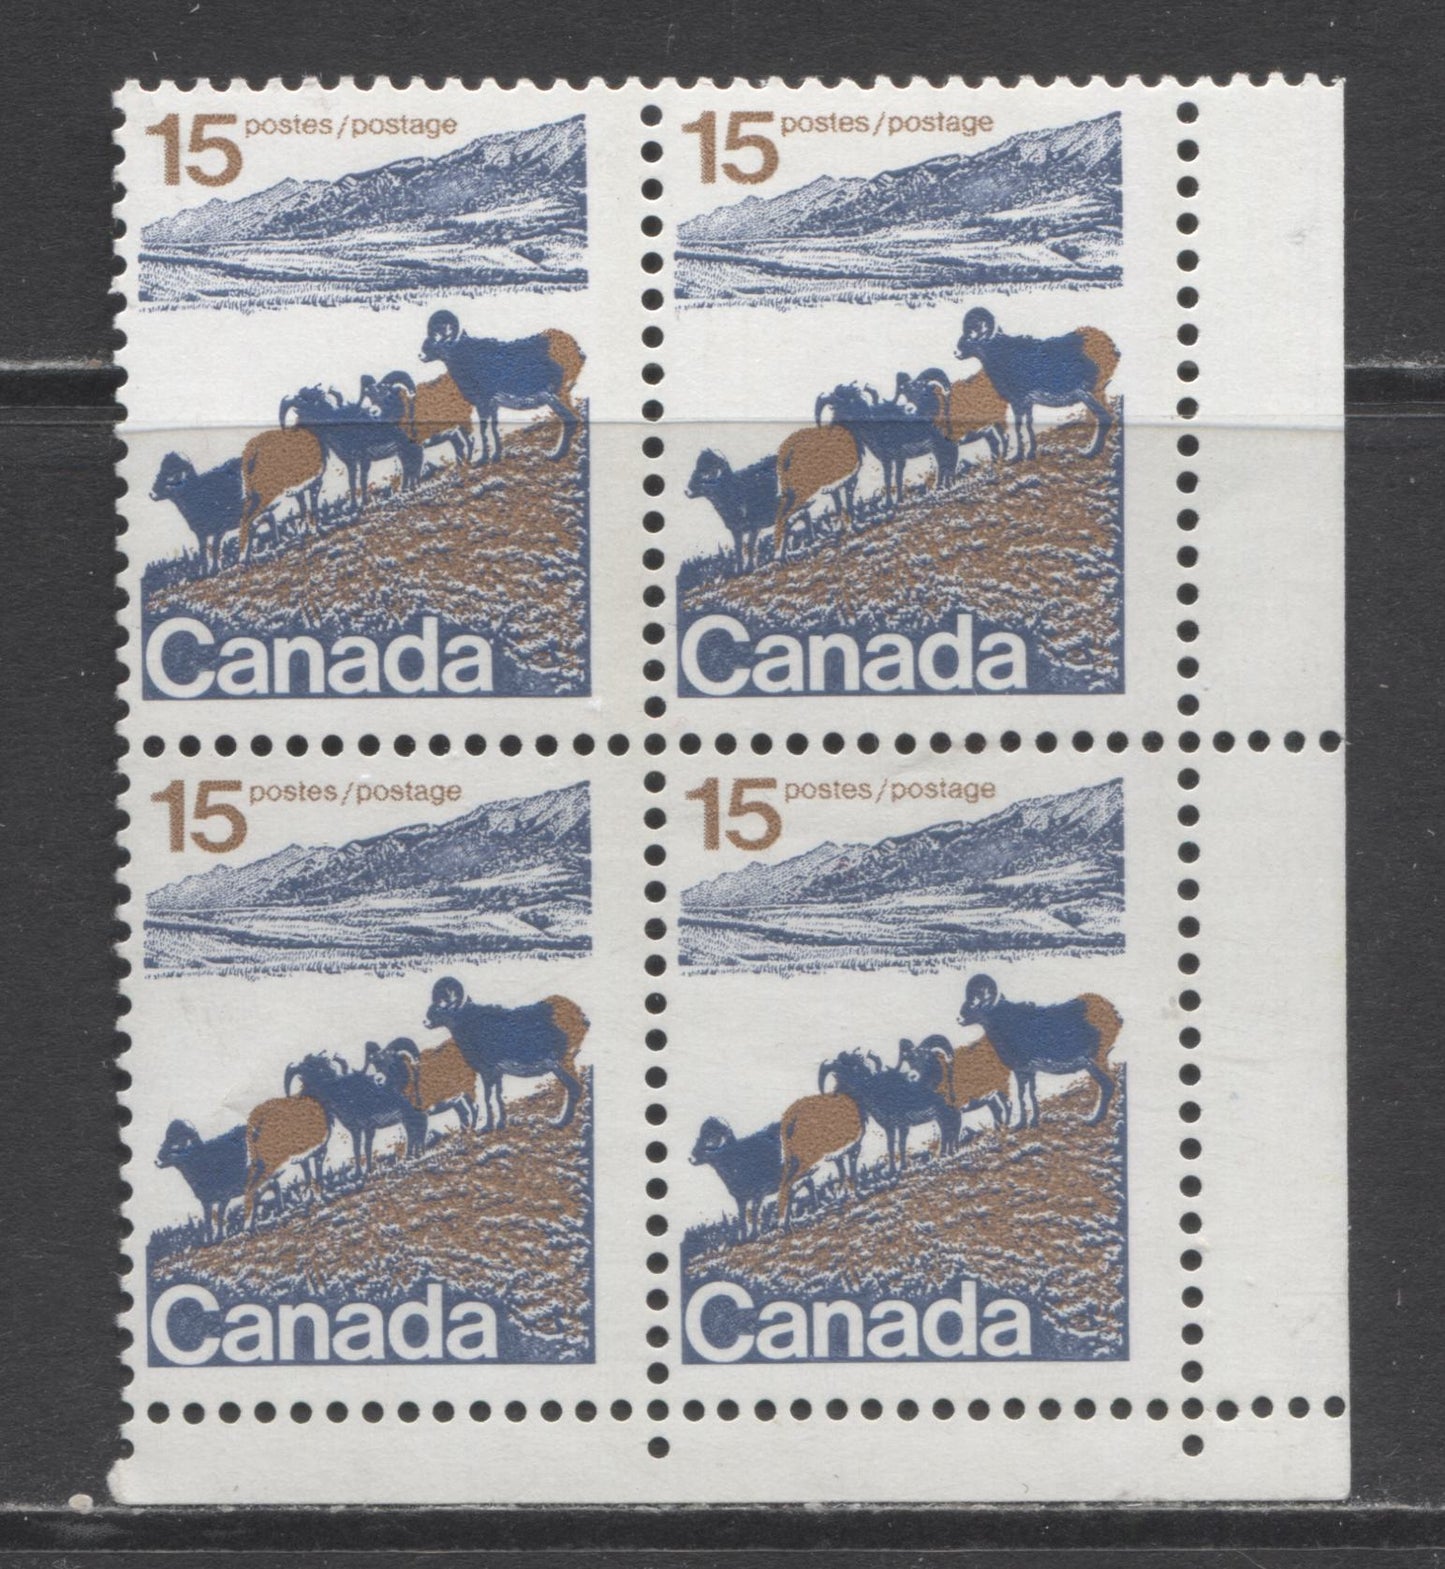 Lot 397 Canada #595i 15c Multicoloured Mountain Sheep, 1972-1978 Caricature and Landscape Issue, A Fine NH/OG LR Corner Block of 4On LF/LF Paper, 1 Bar Tagging Error